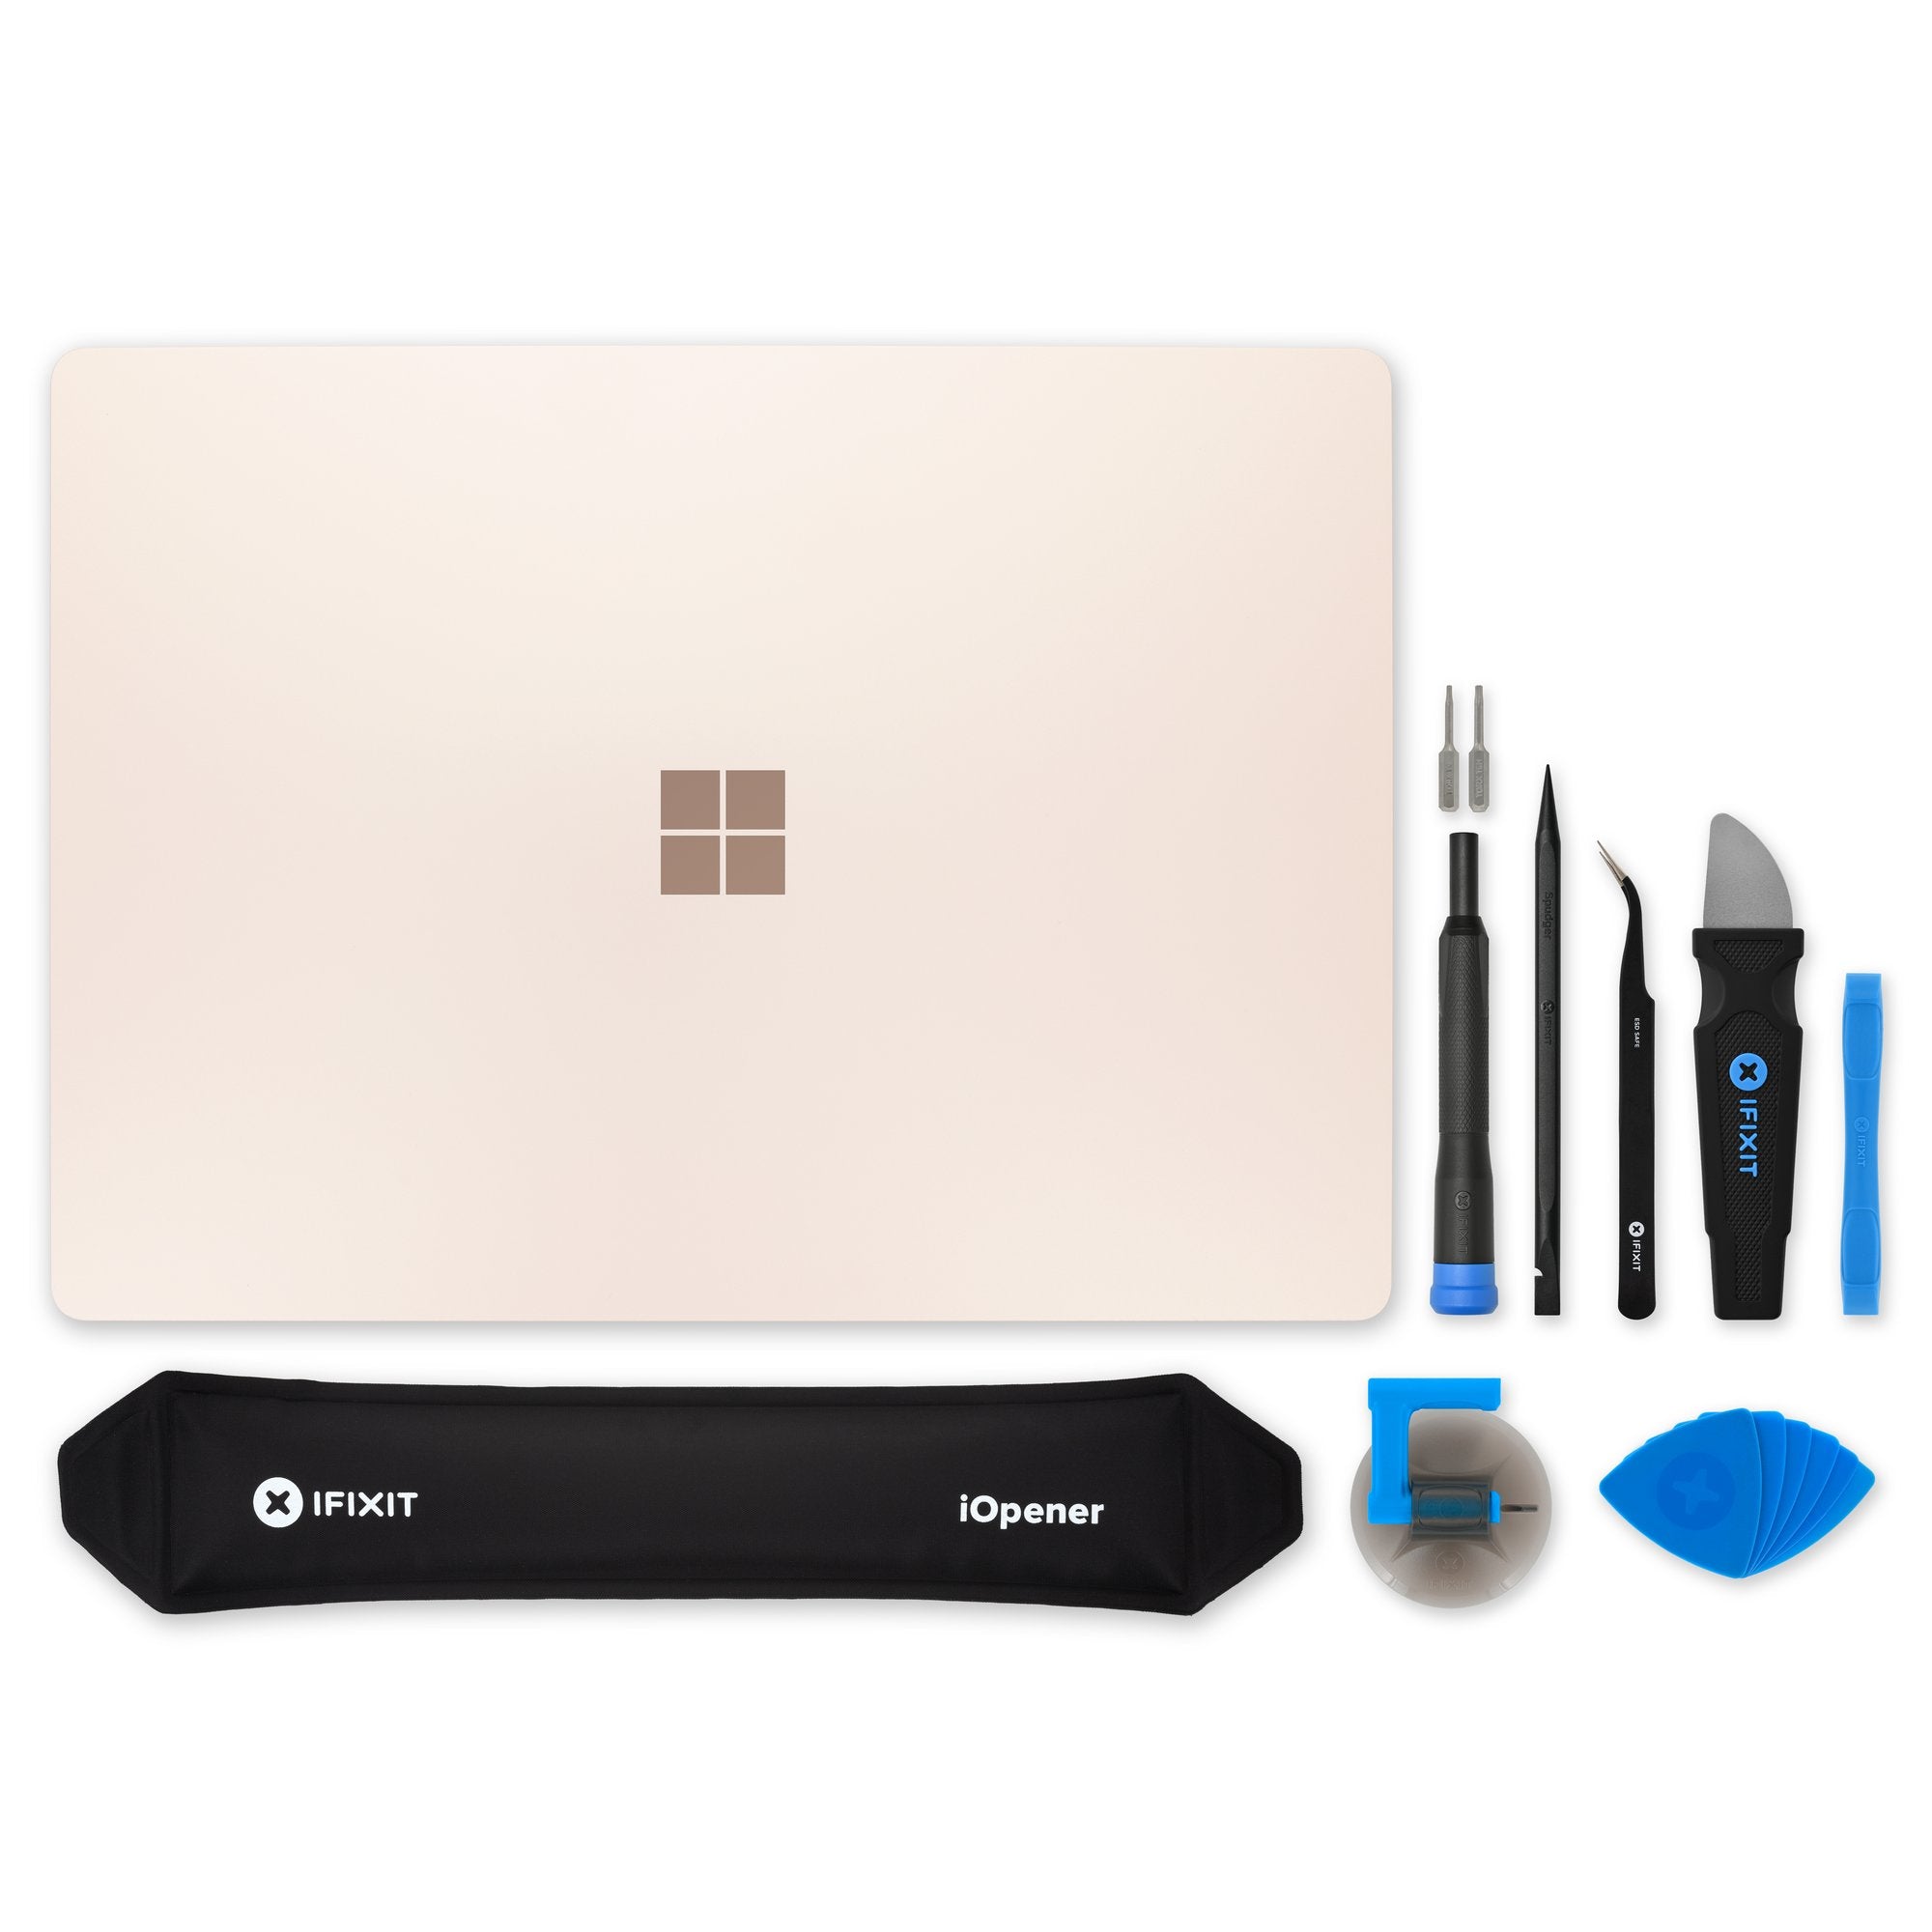 Surface Laptop 3 and 4 13.5" Screen Assembly - Genuine Sandstone New Fix Kit